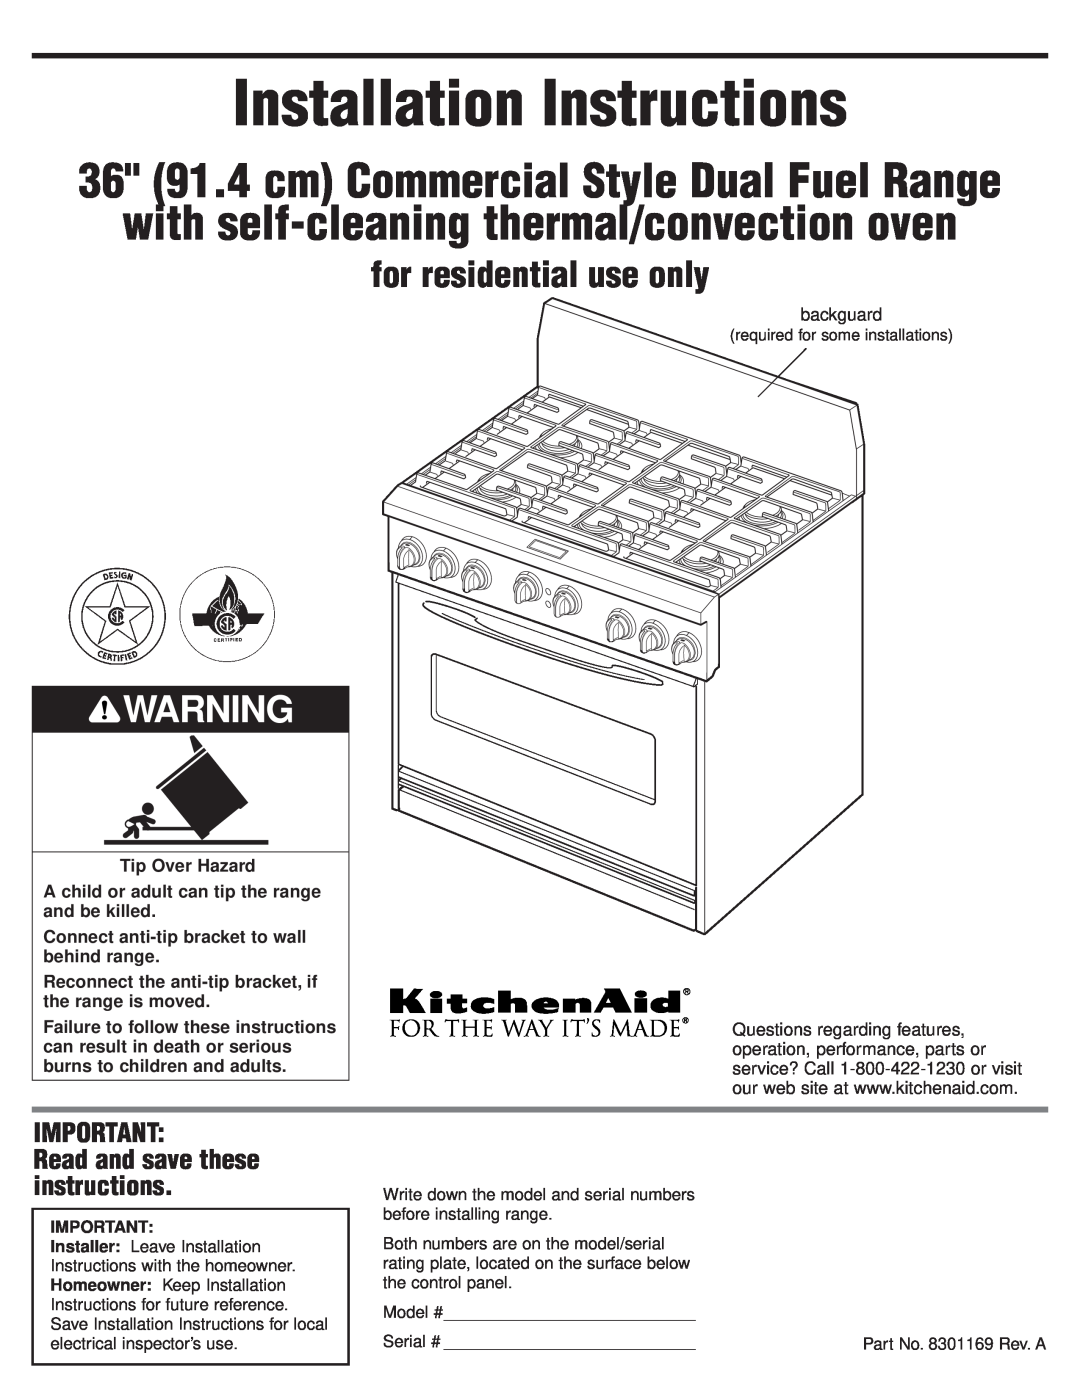 KitchenAid 8301169 installation instructions Installation Instructions, with self-cleaningthermal/convection oven 